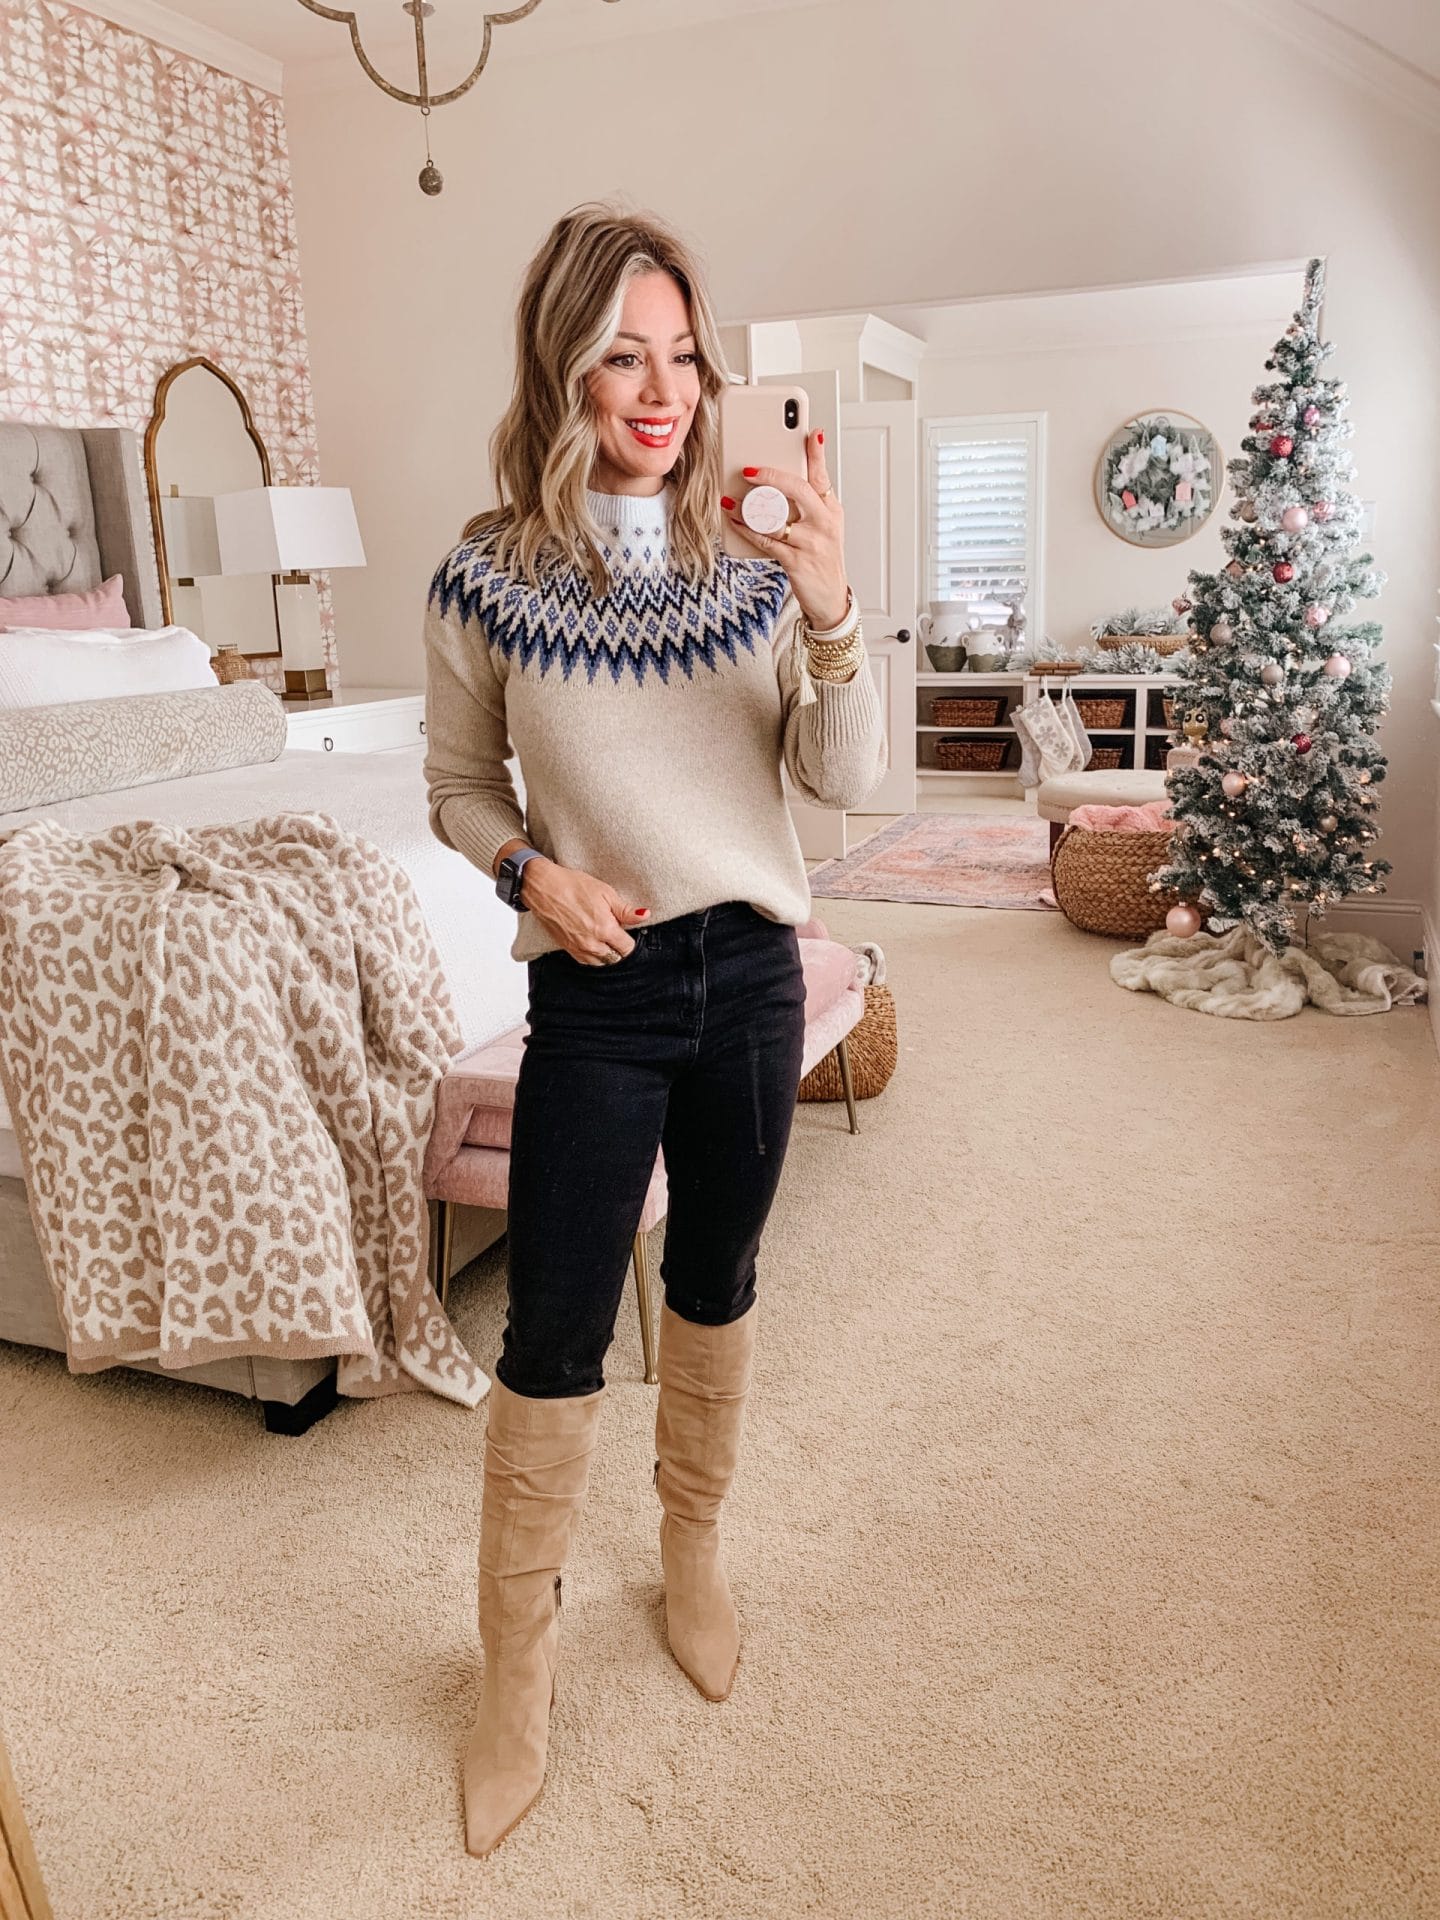 Amazon Fashion, Sweater, Jeans, Boots 